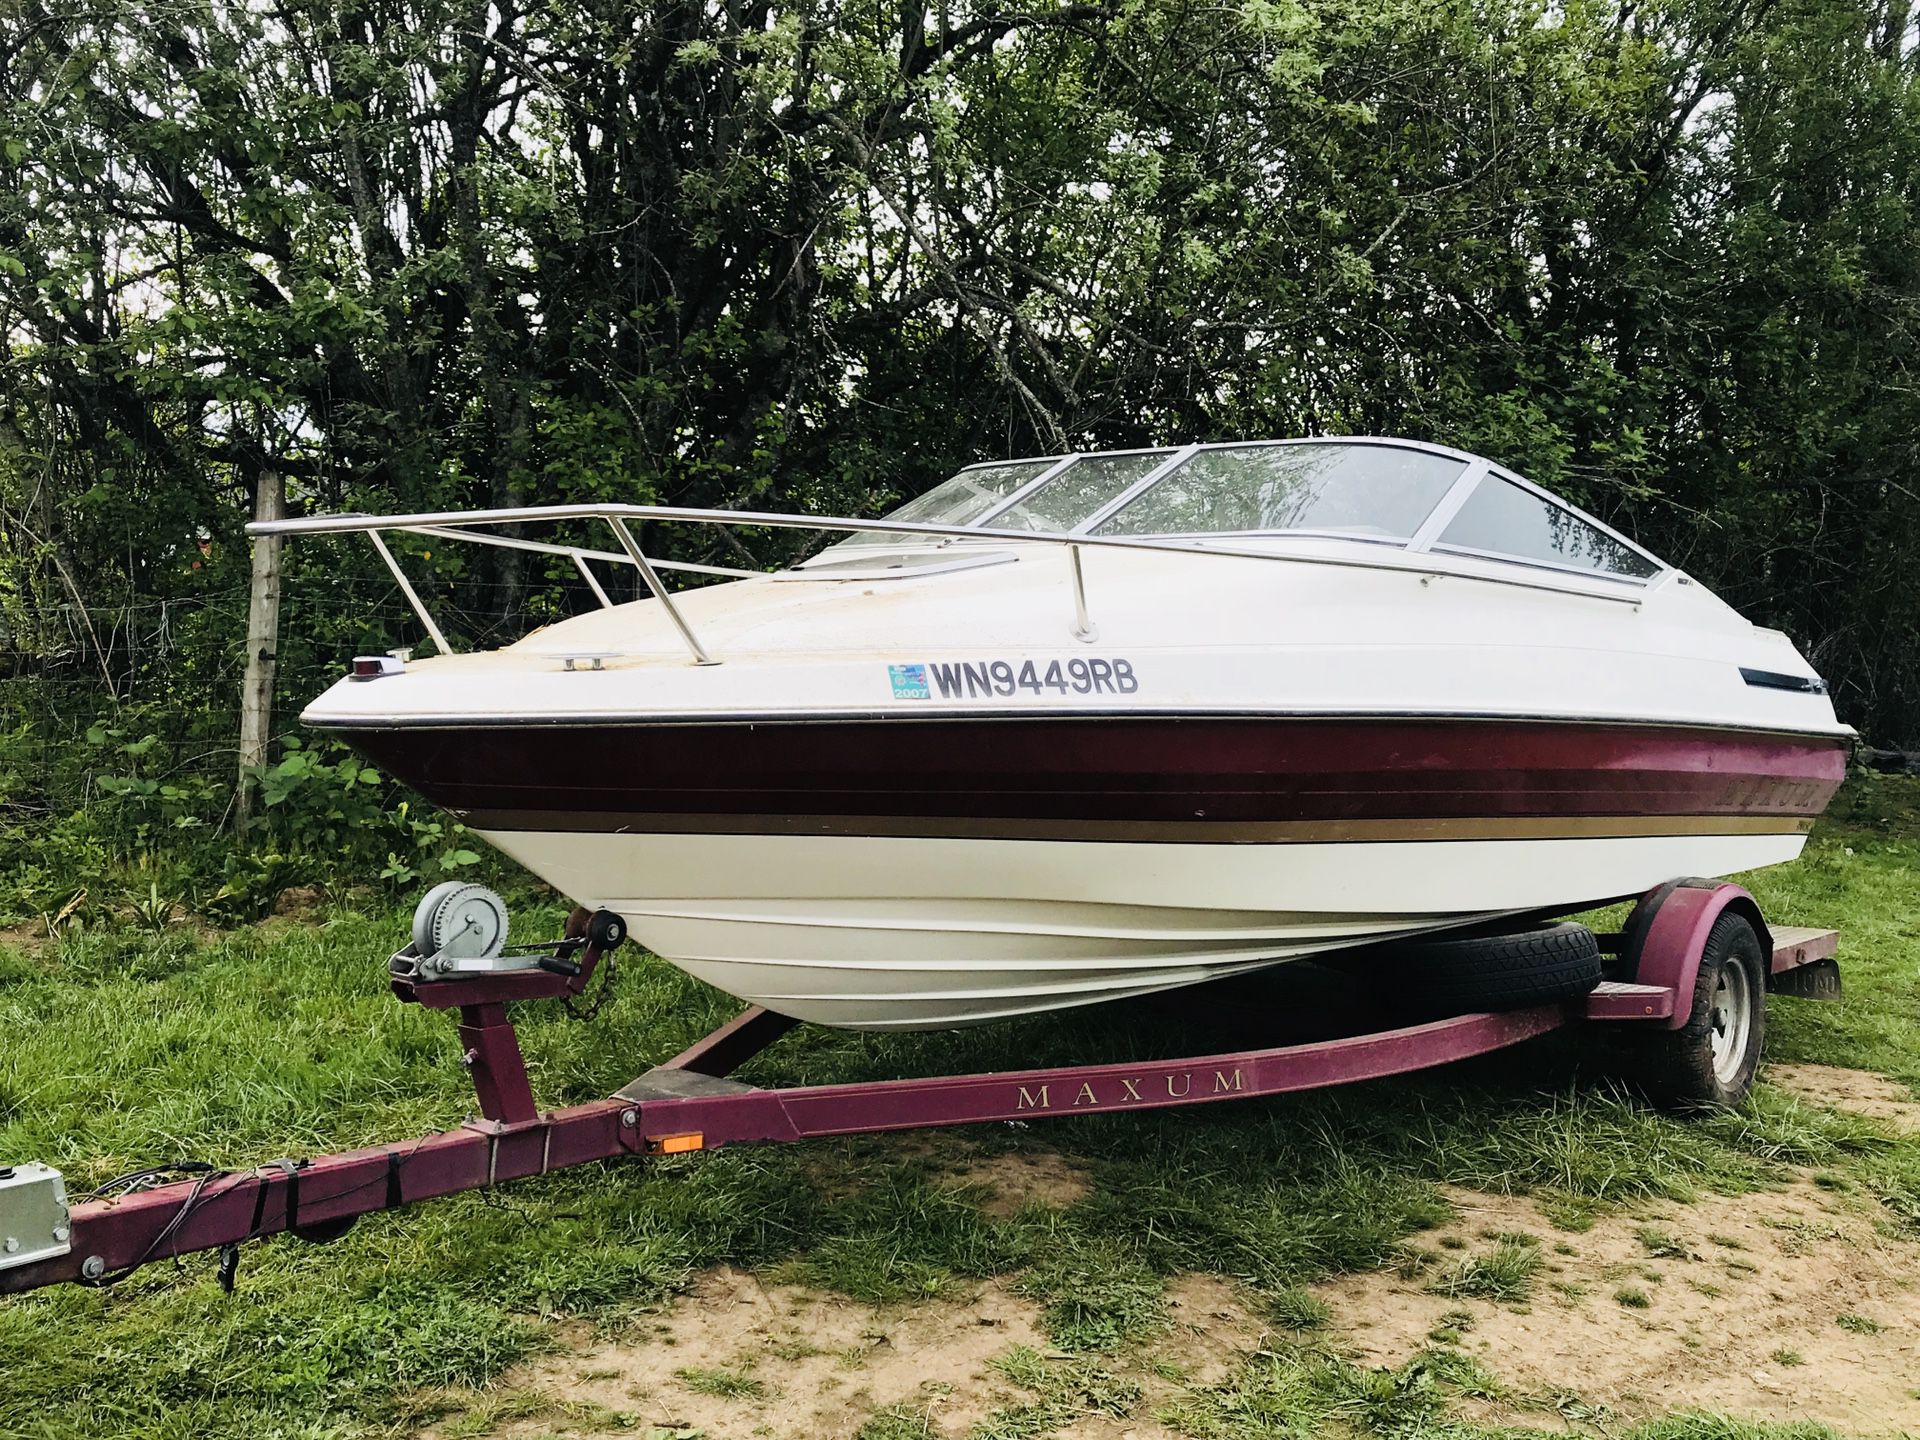 MAXUM boat sell or trade for Aluminum boat